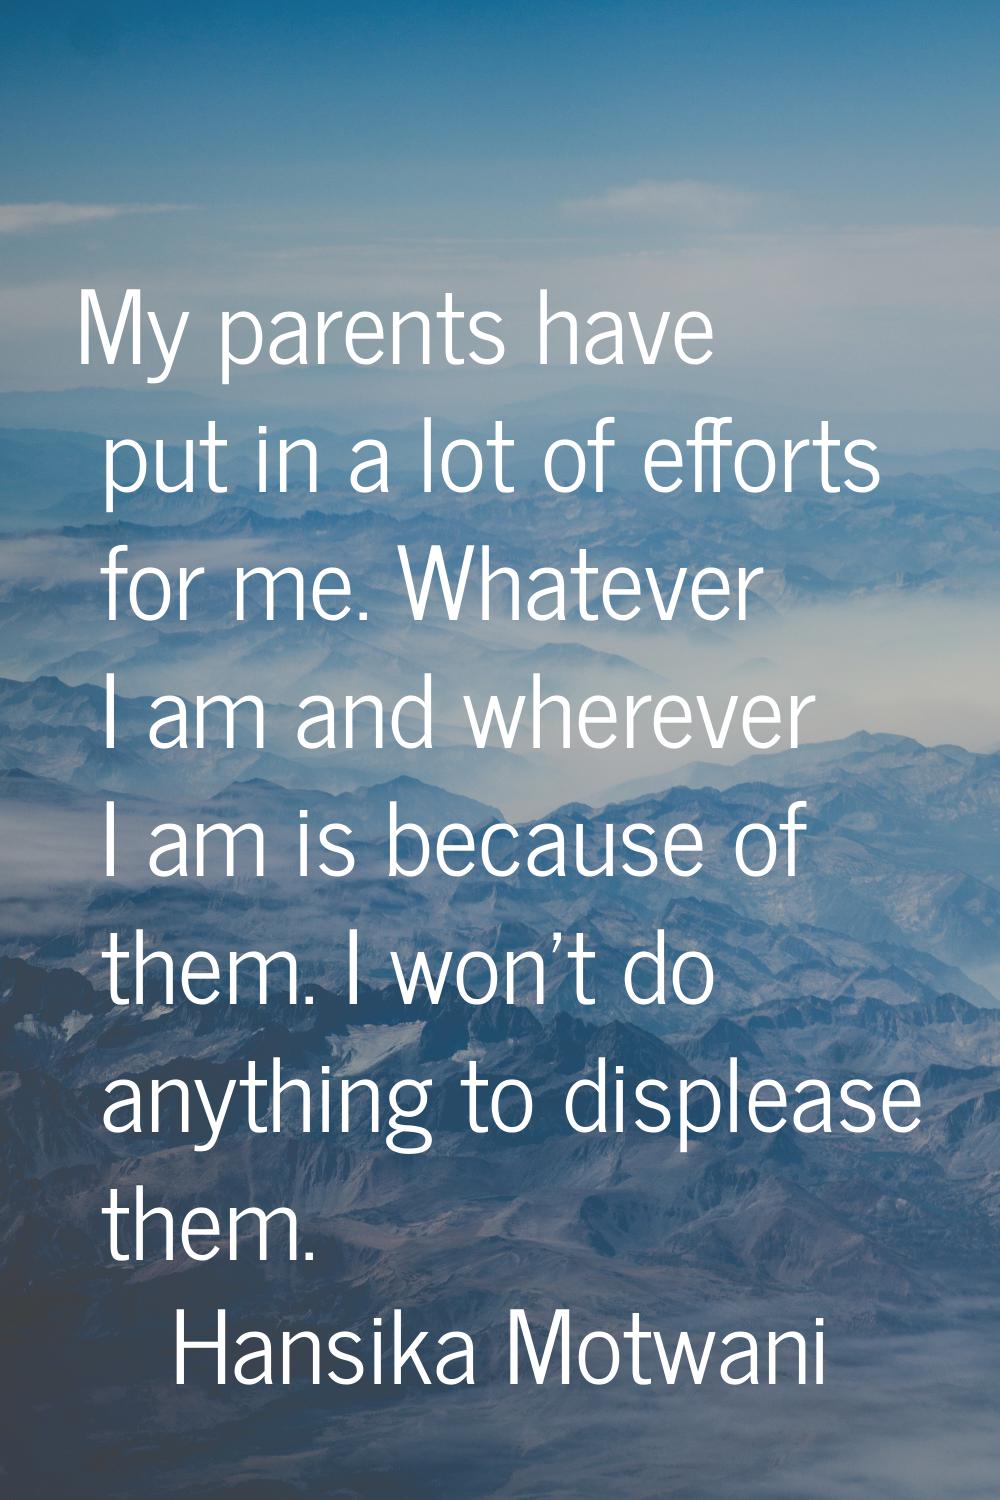 My parents have put in a lot of efforts for me. Whatever I am and wherever I am is because of them.